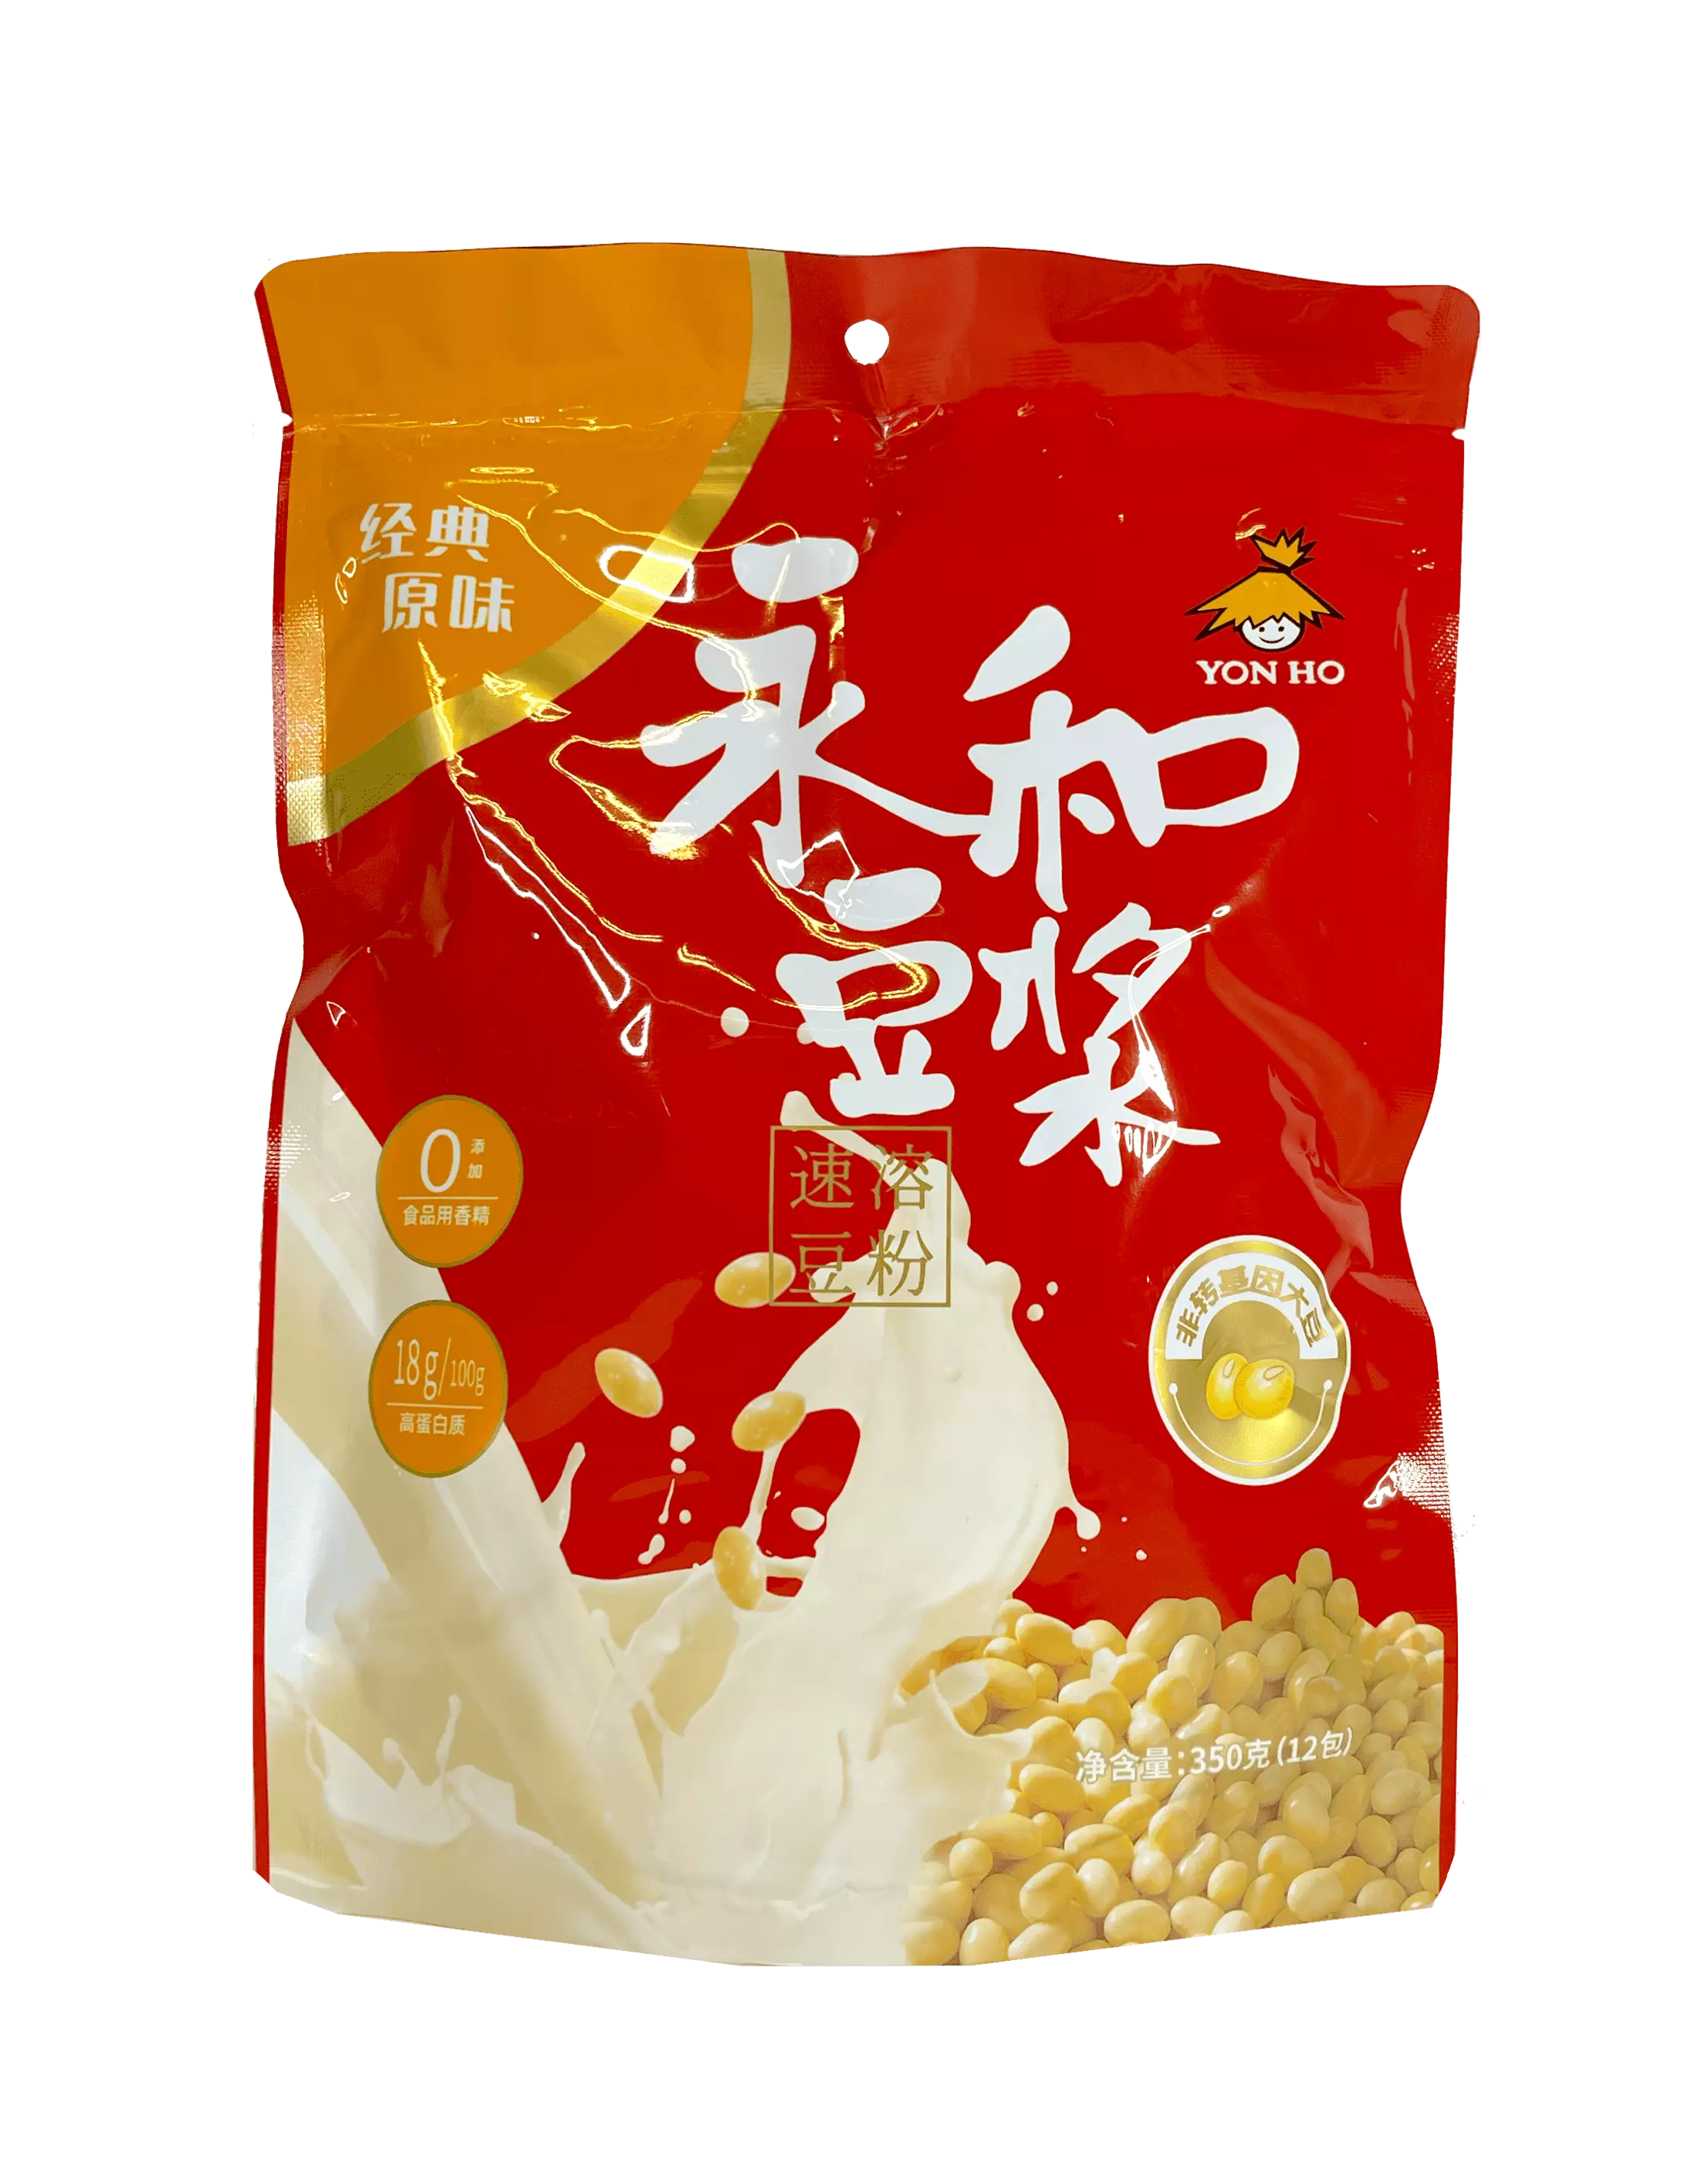 Instant Soy Drink Classic / Original 350g Yon Ho China